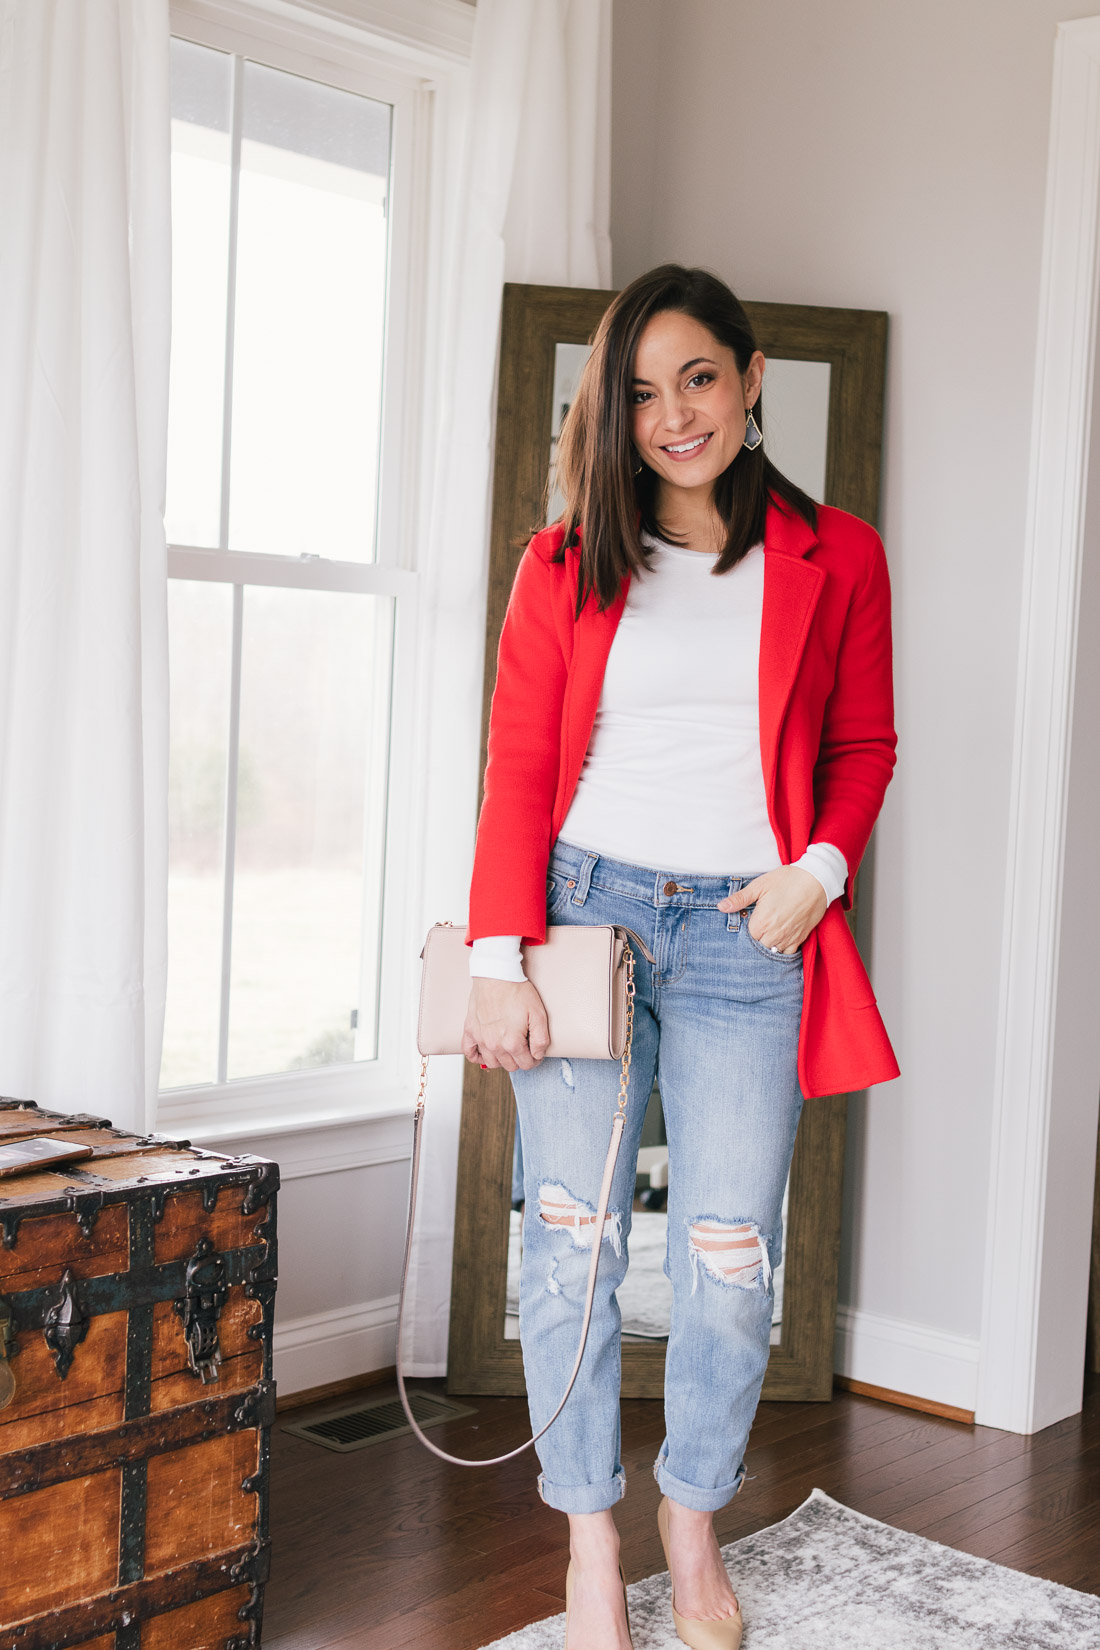 Wear Red For Women & J. Crew Giveaway - Pumps & Push Ups